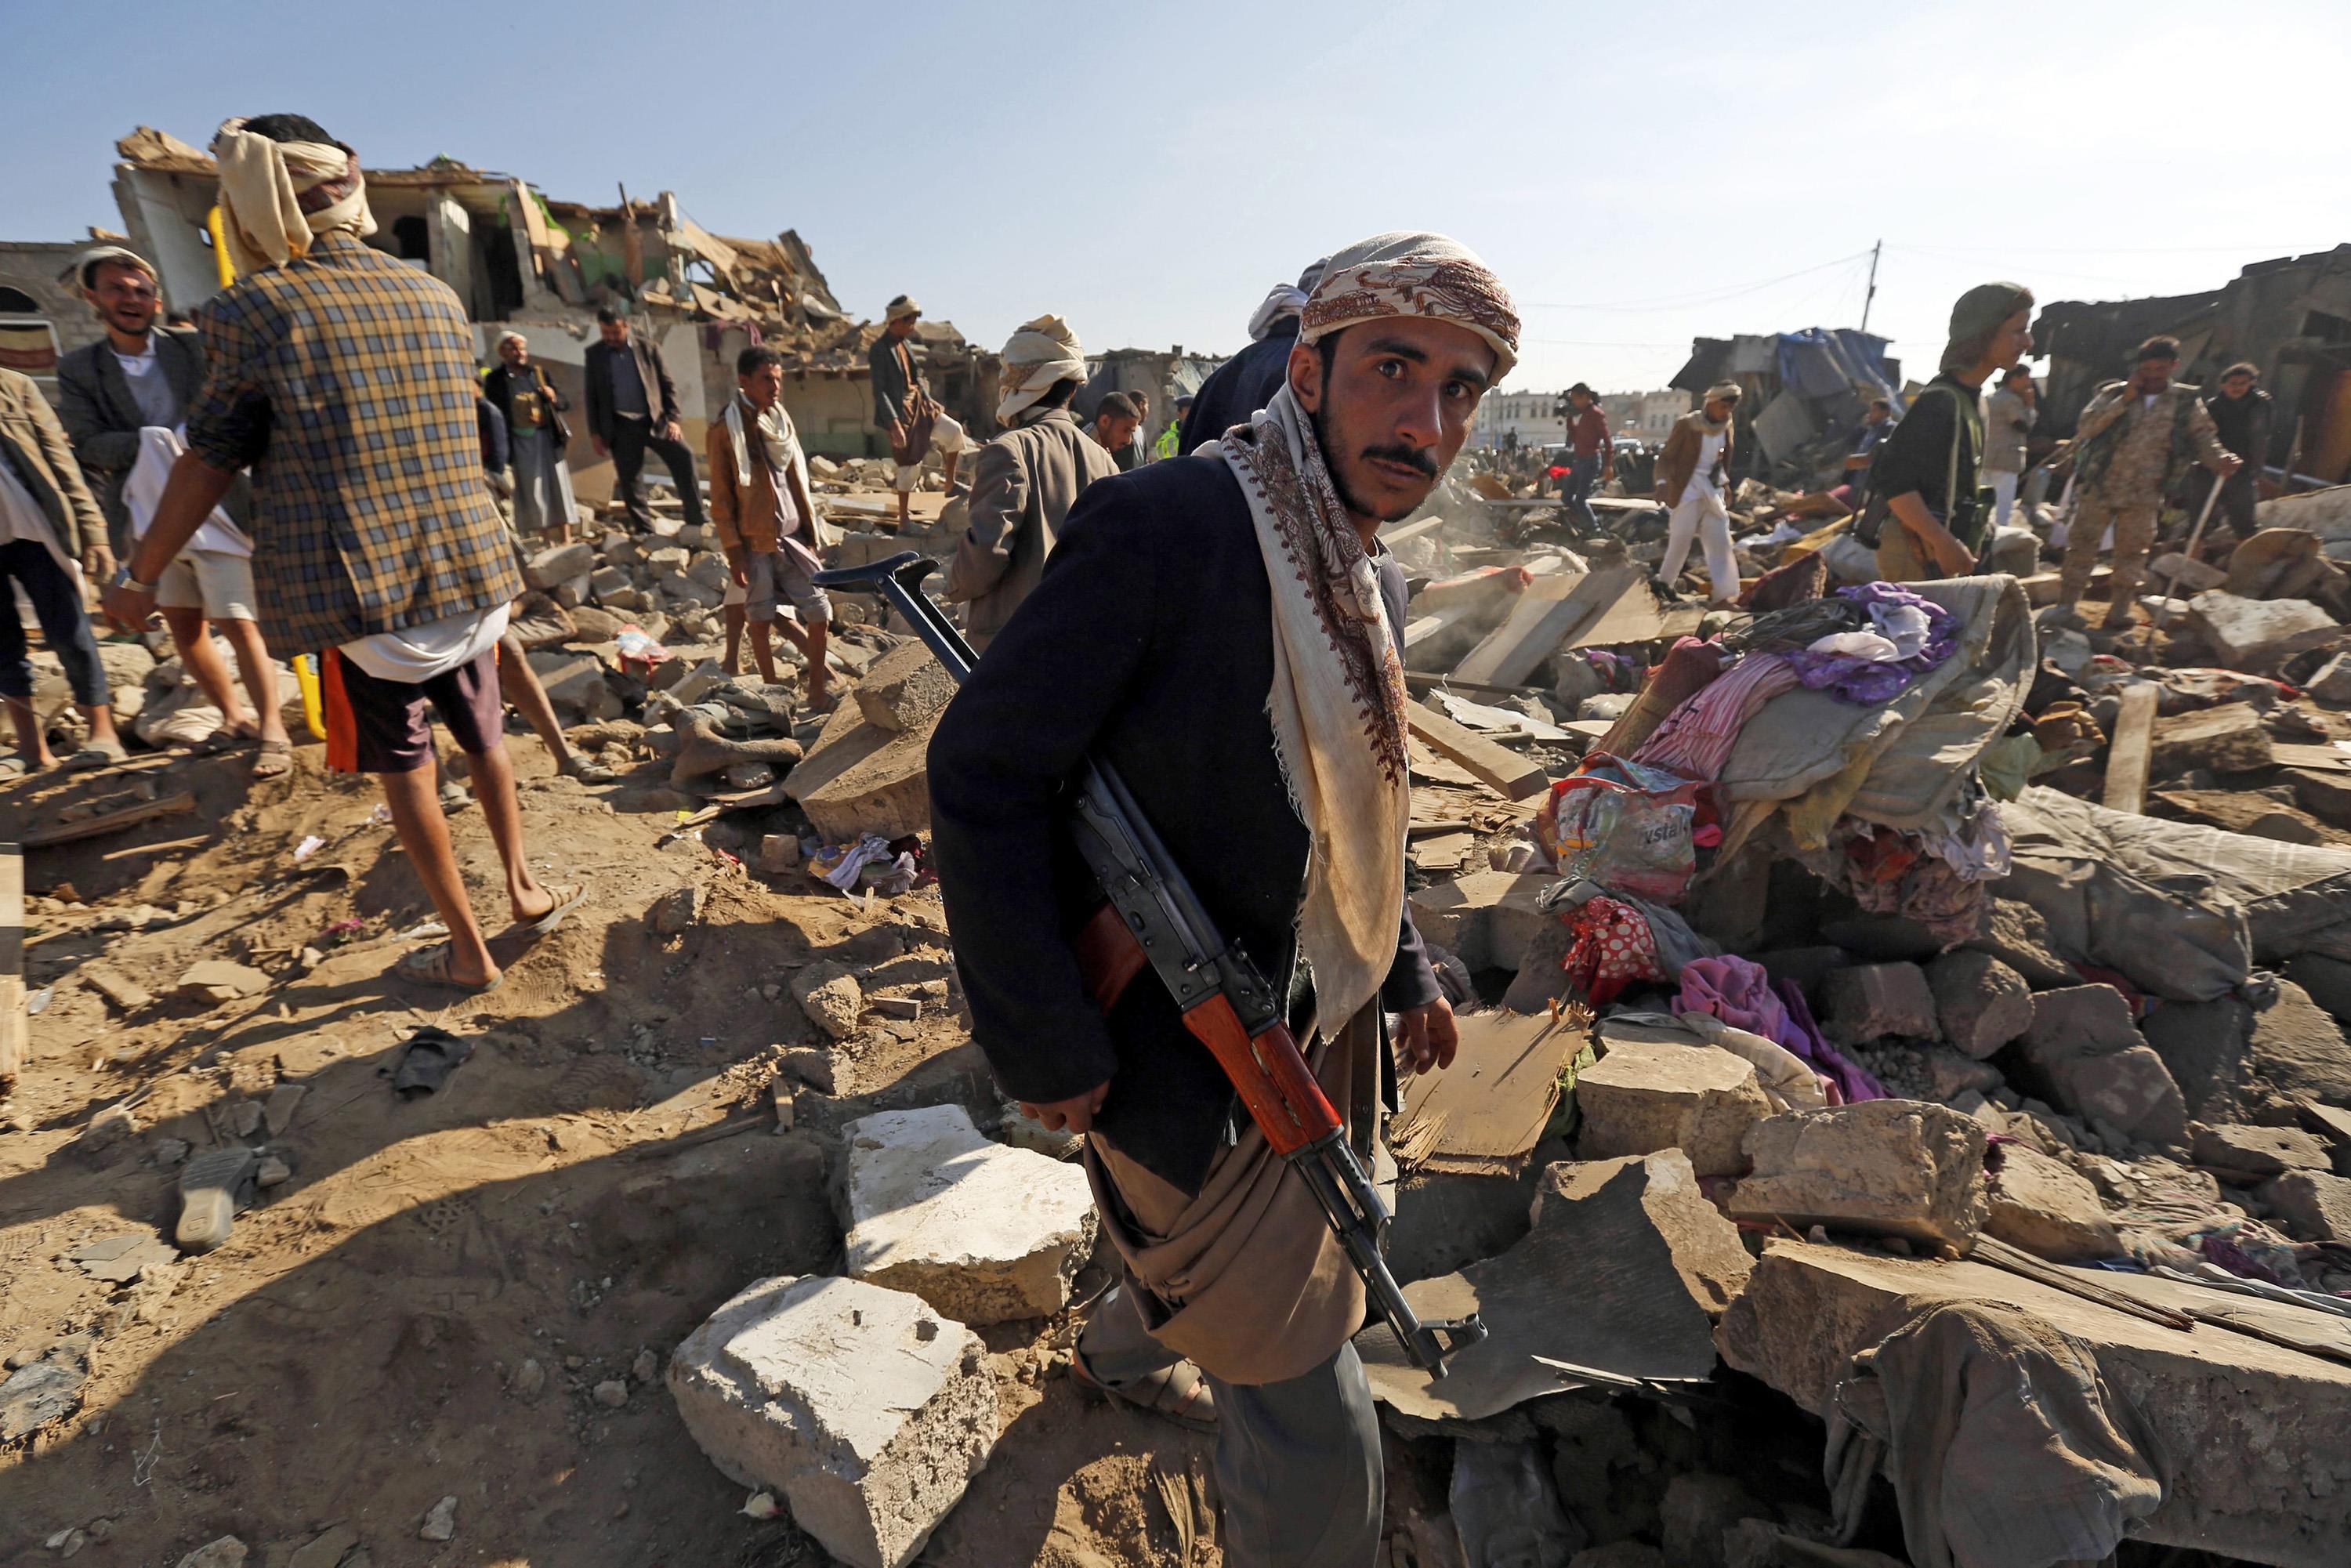 Yemen: From Arab Military Action to Birth of Permanent Force?